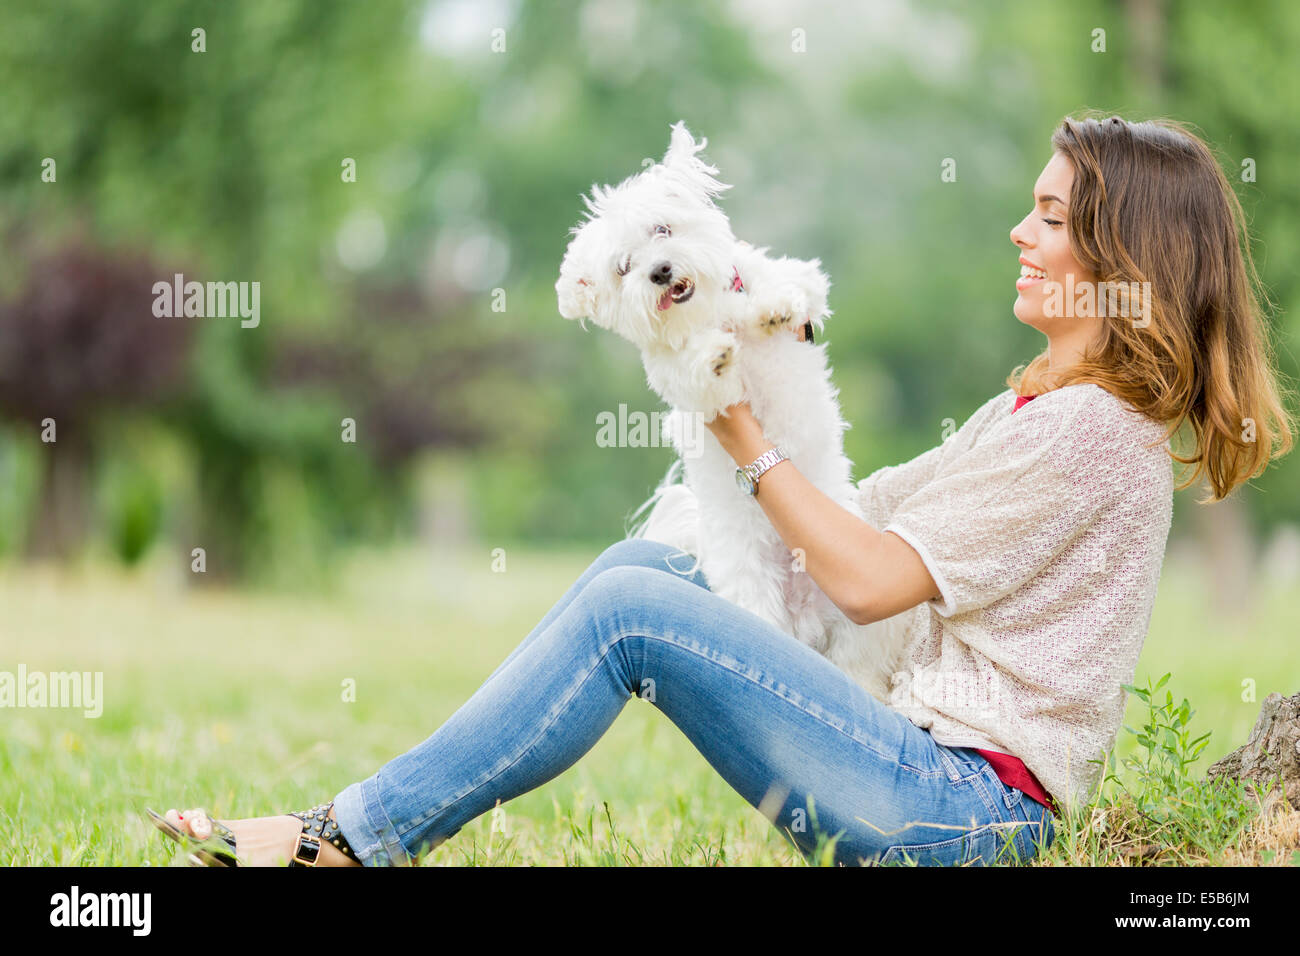 Young woman with a maltese dog Stock Photo